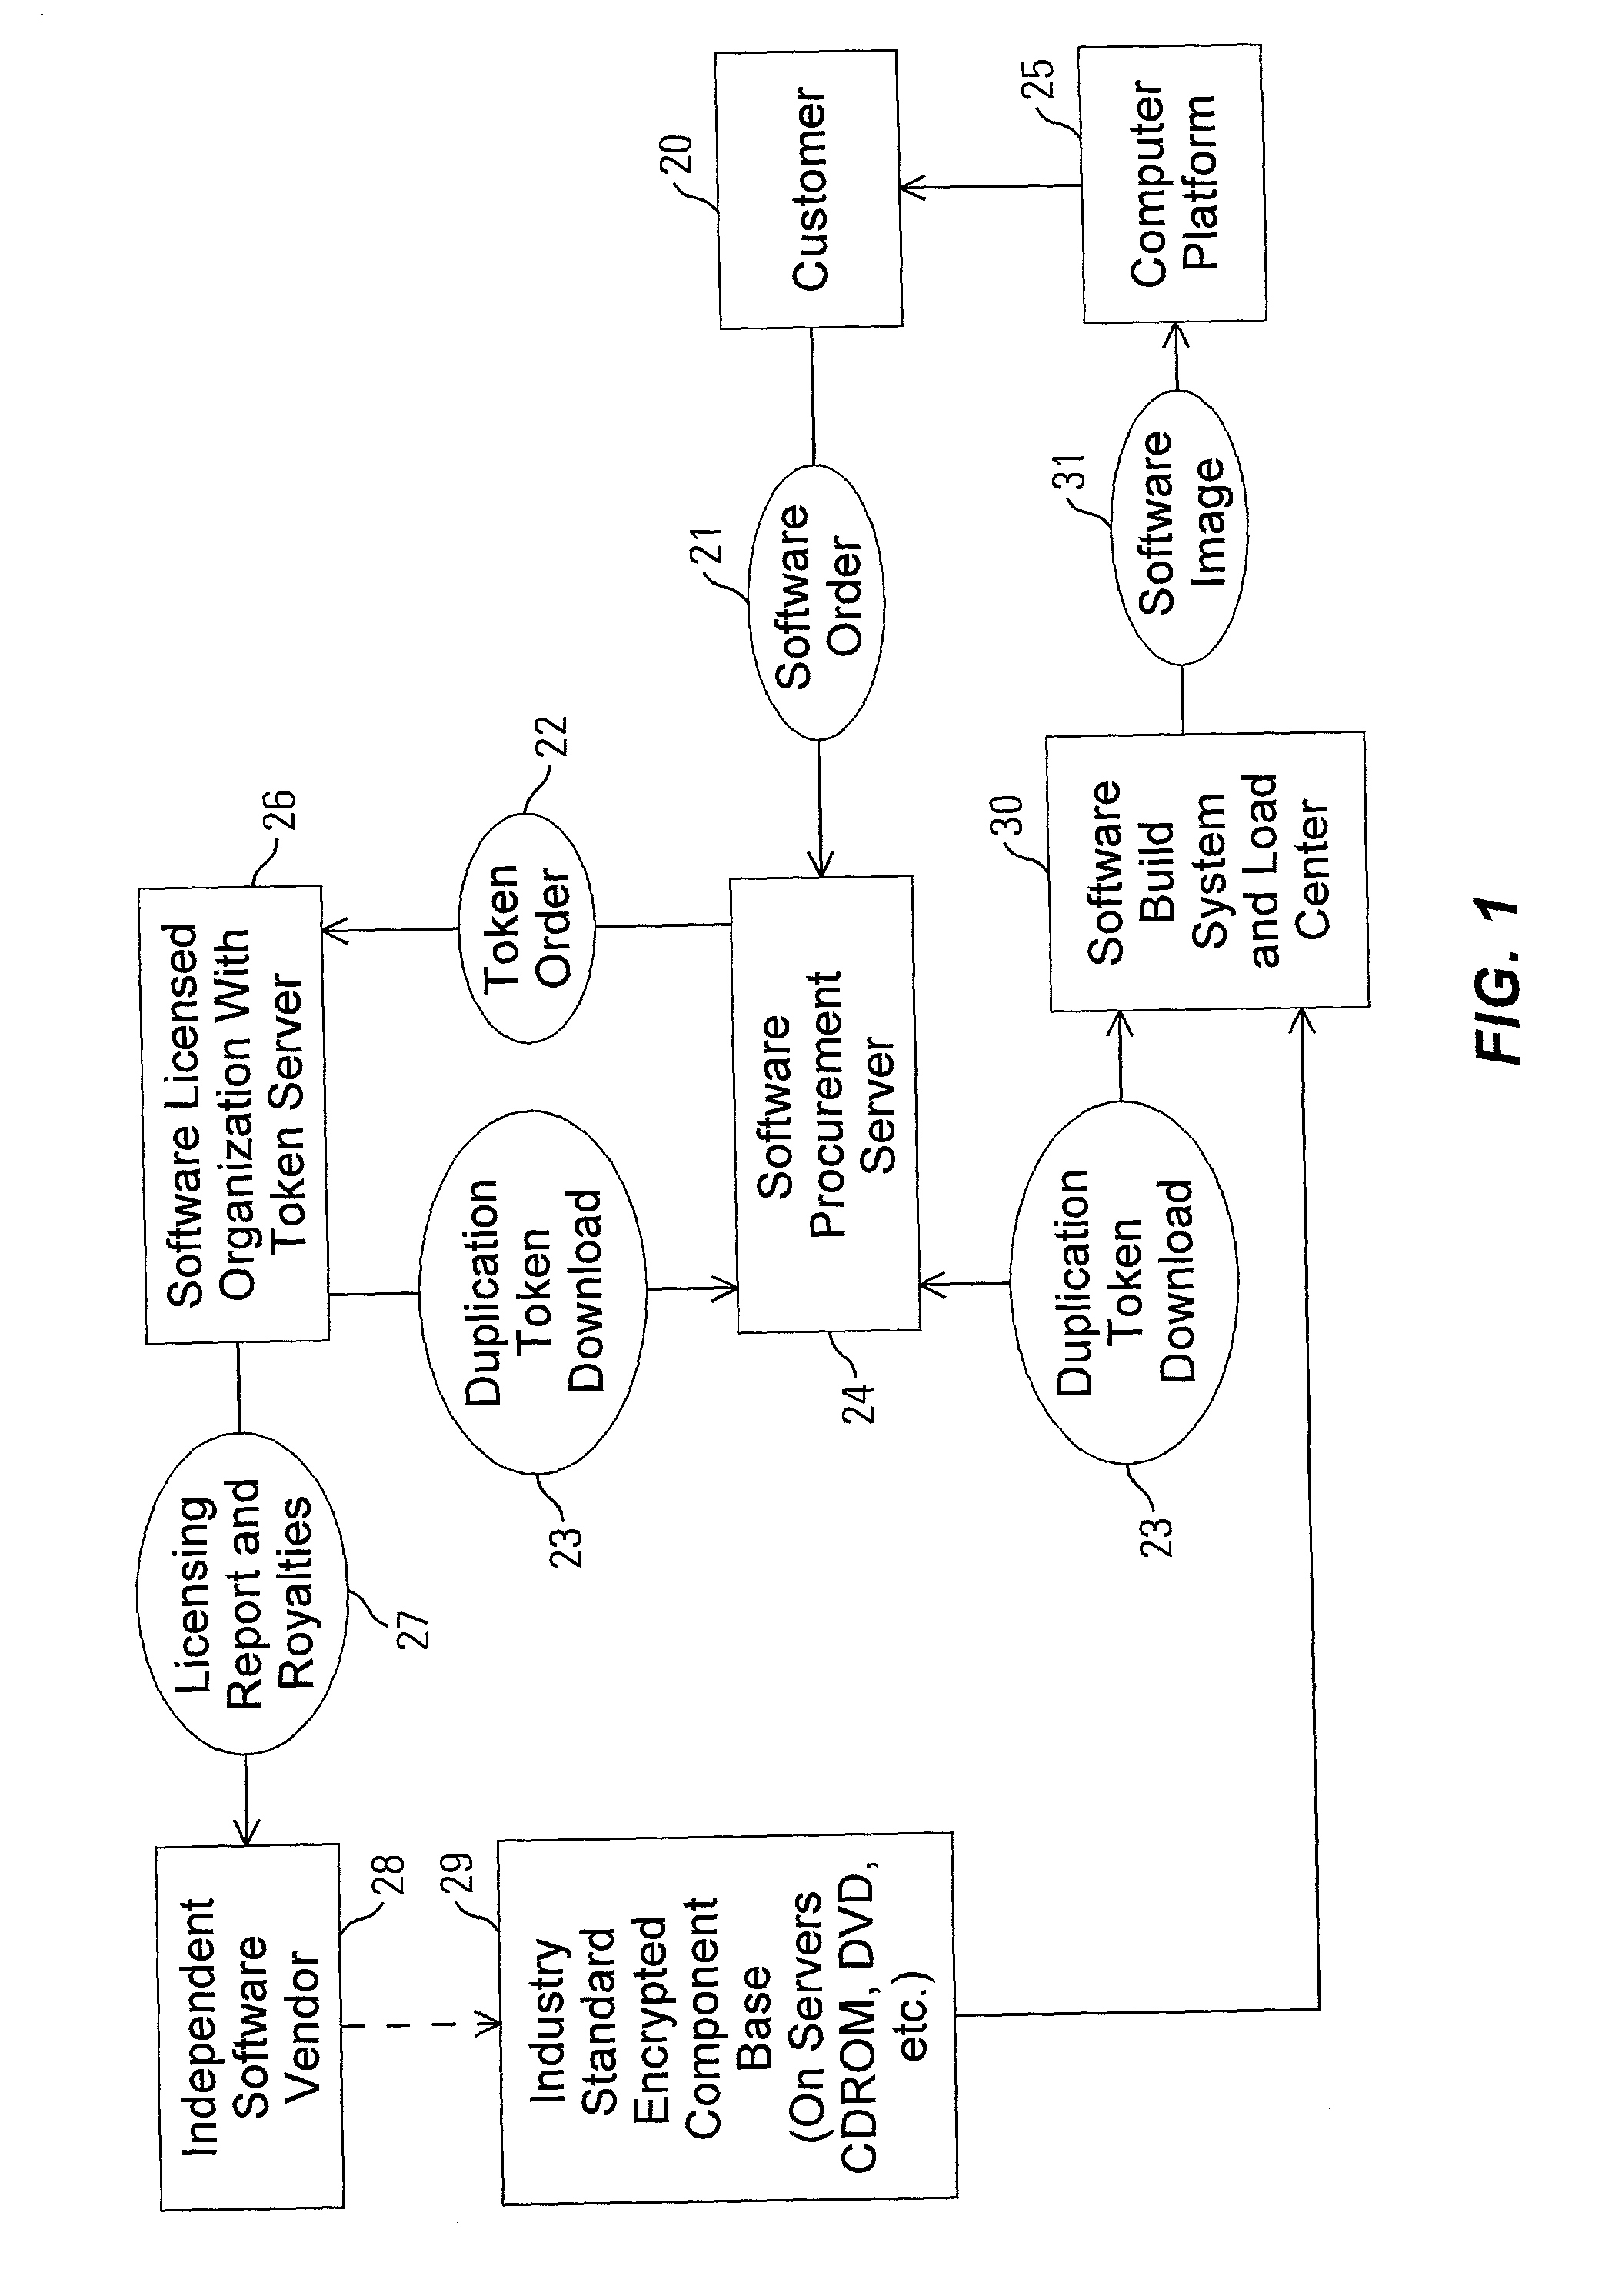 Method and apparatus for uniquely and securely loading software to an individual computer